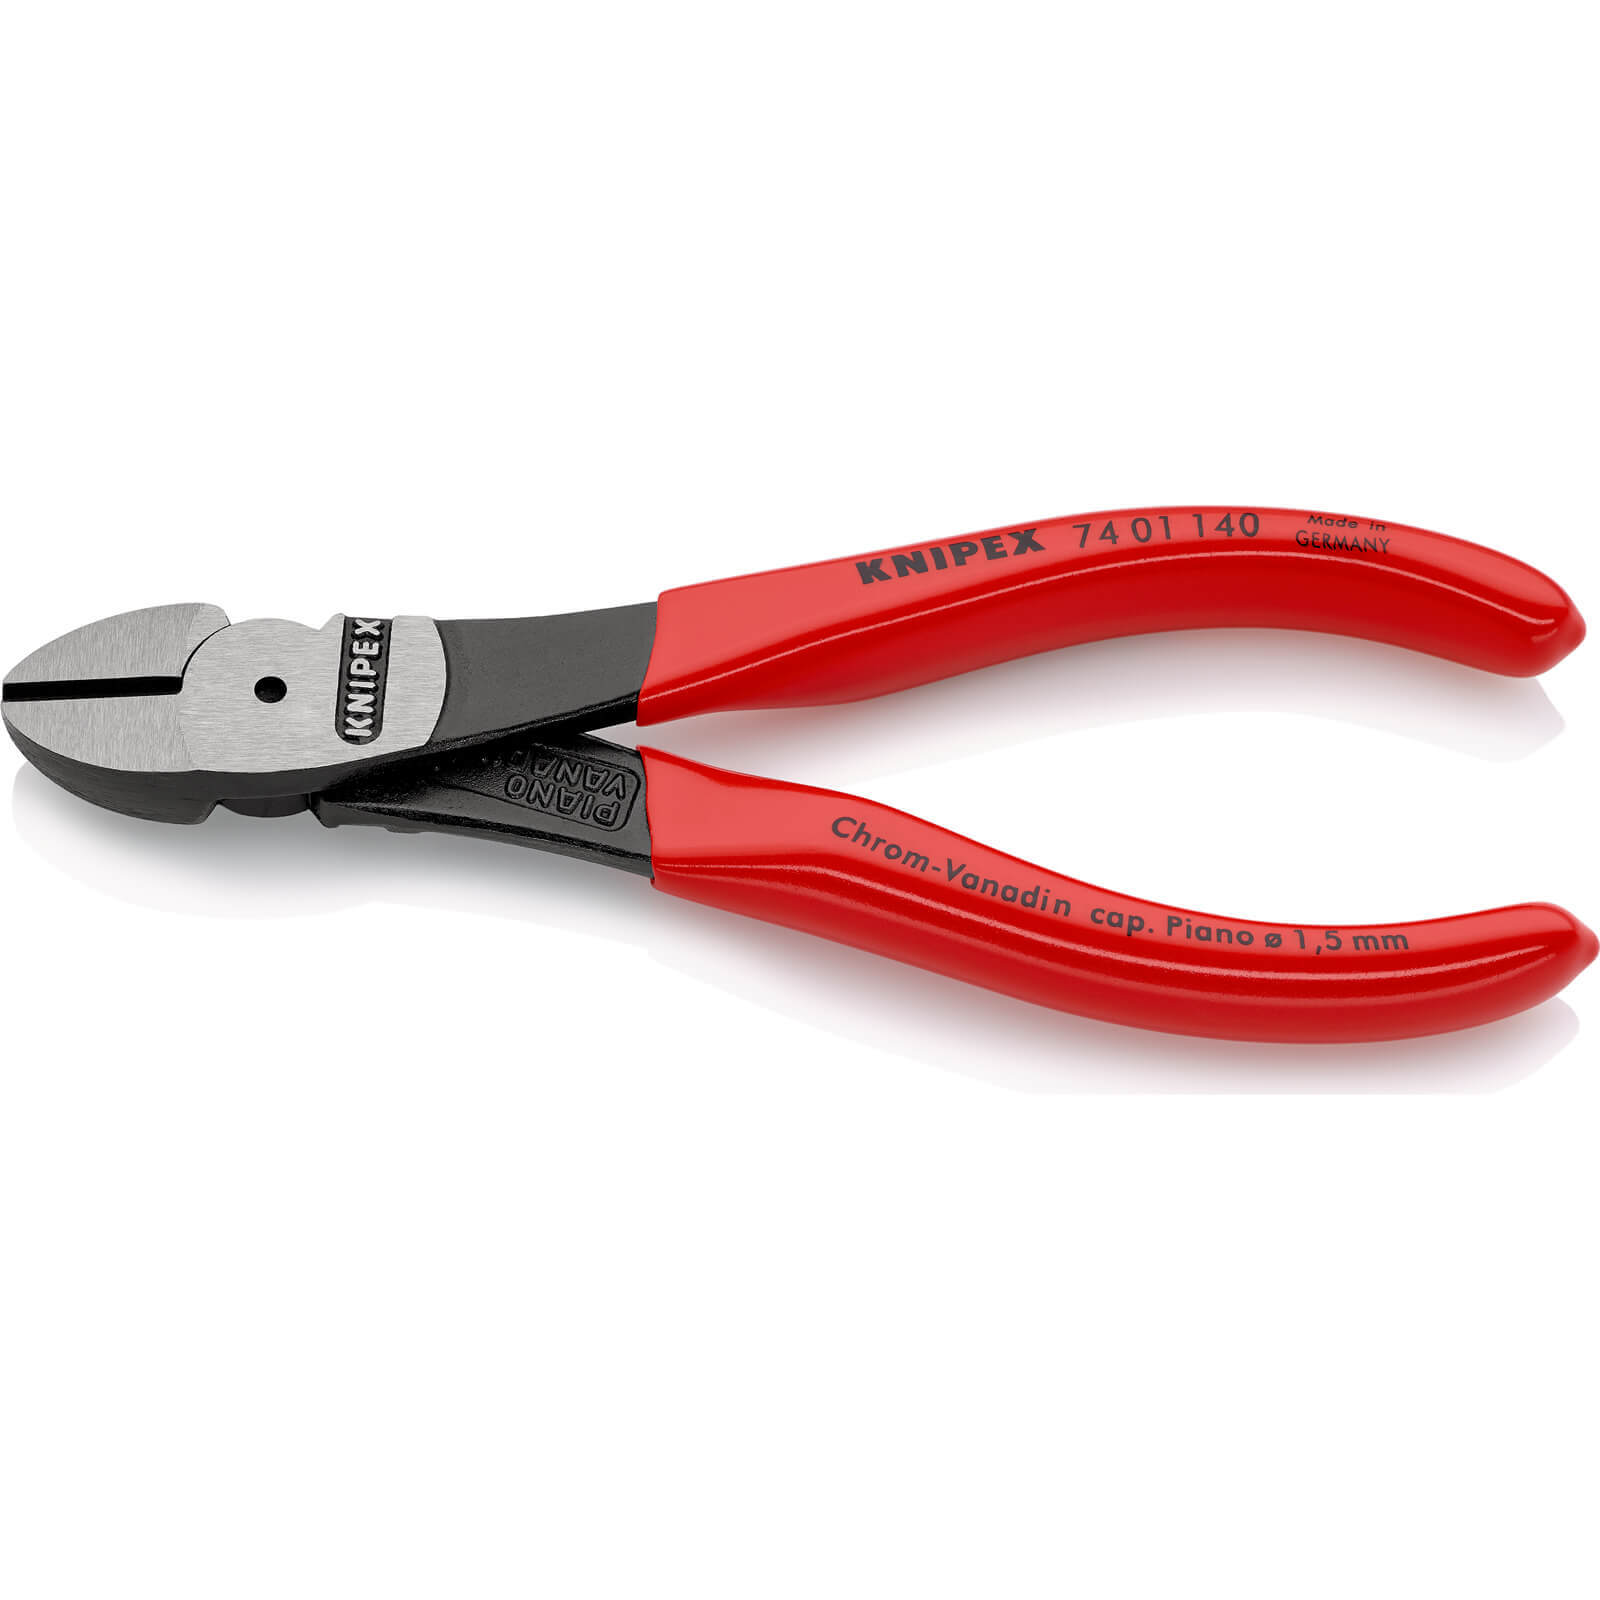 Image of Knipex 74 01 High Leverage Diagonal Cutting Pliers 140mm